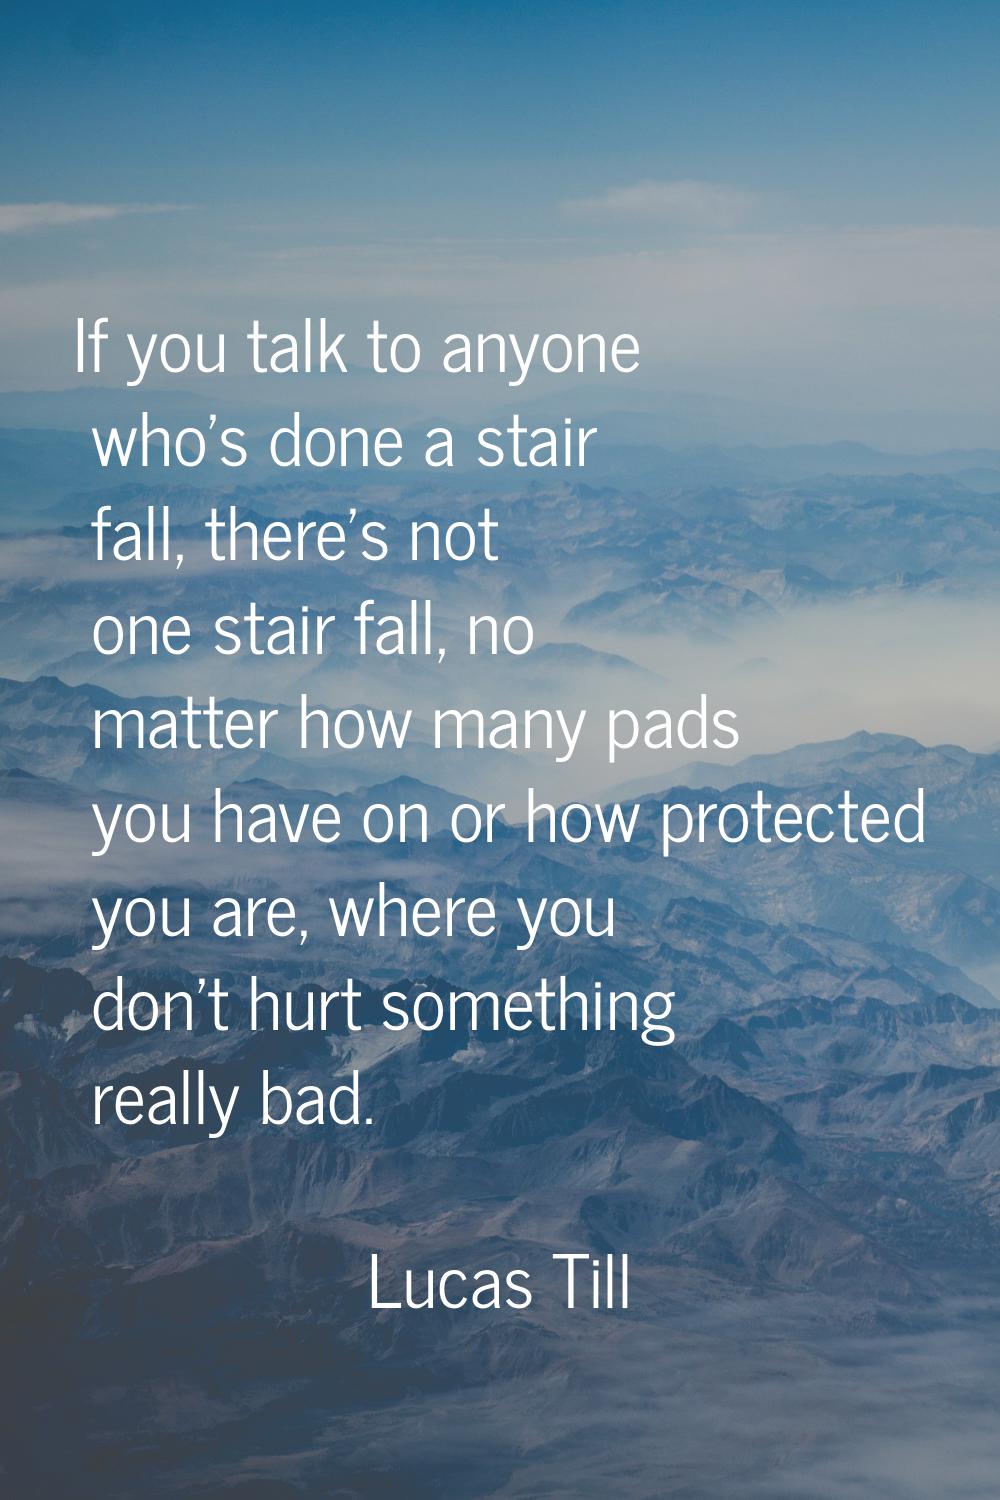 If you talk to anyone who's done a stair fall, there's not one stair fall, no matter how many pads 